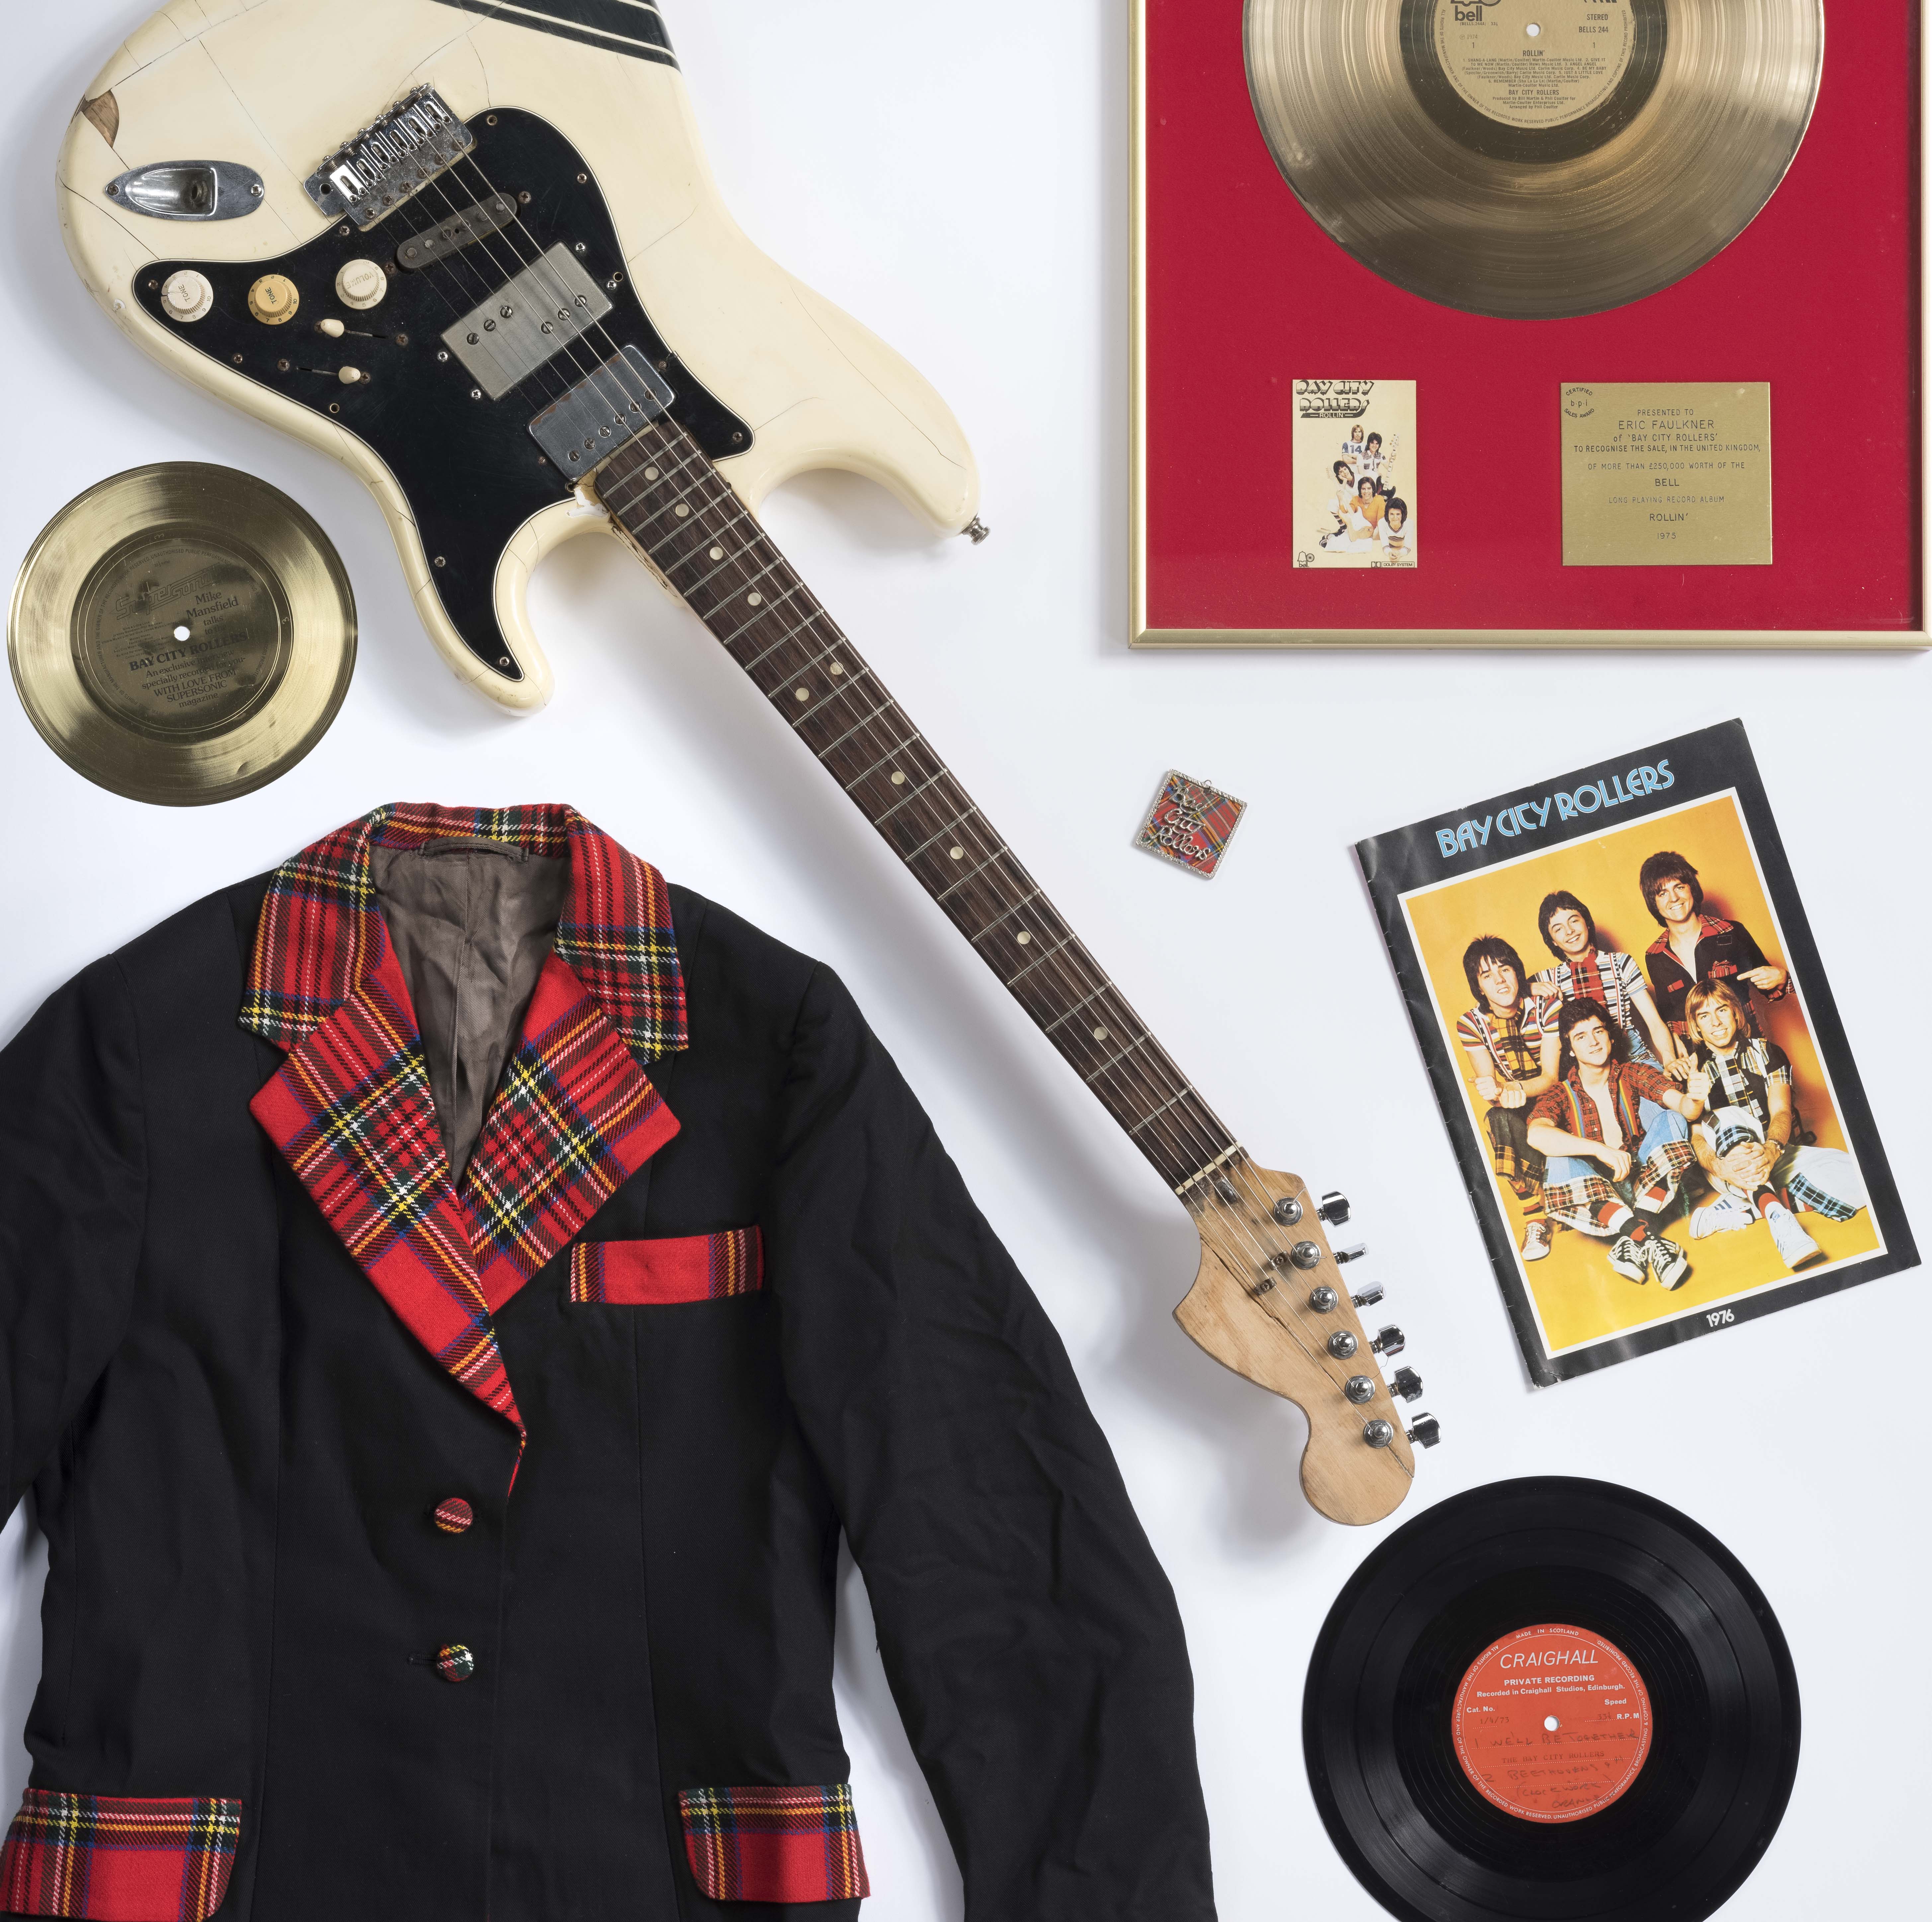 ‘Bay City Rollers jacket, 1976 tour programme, supersonic floppy disc and fan club badge on loan from a private collection; Bay City Rollers gold disc, guitar and earliest unreleased Bay City Roller acetate recording on loan from a private collection.